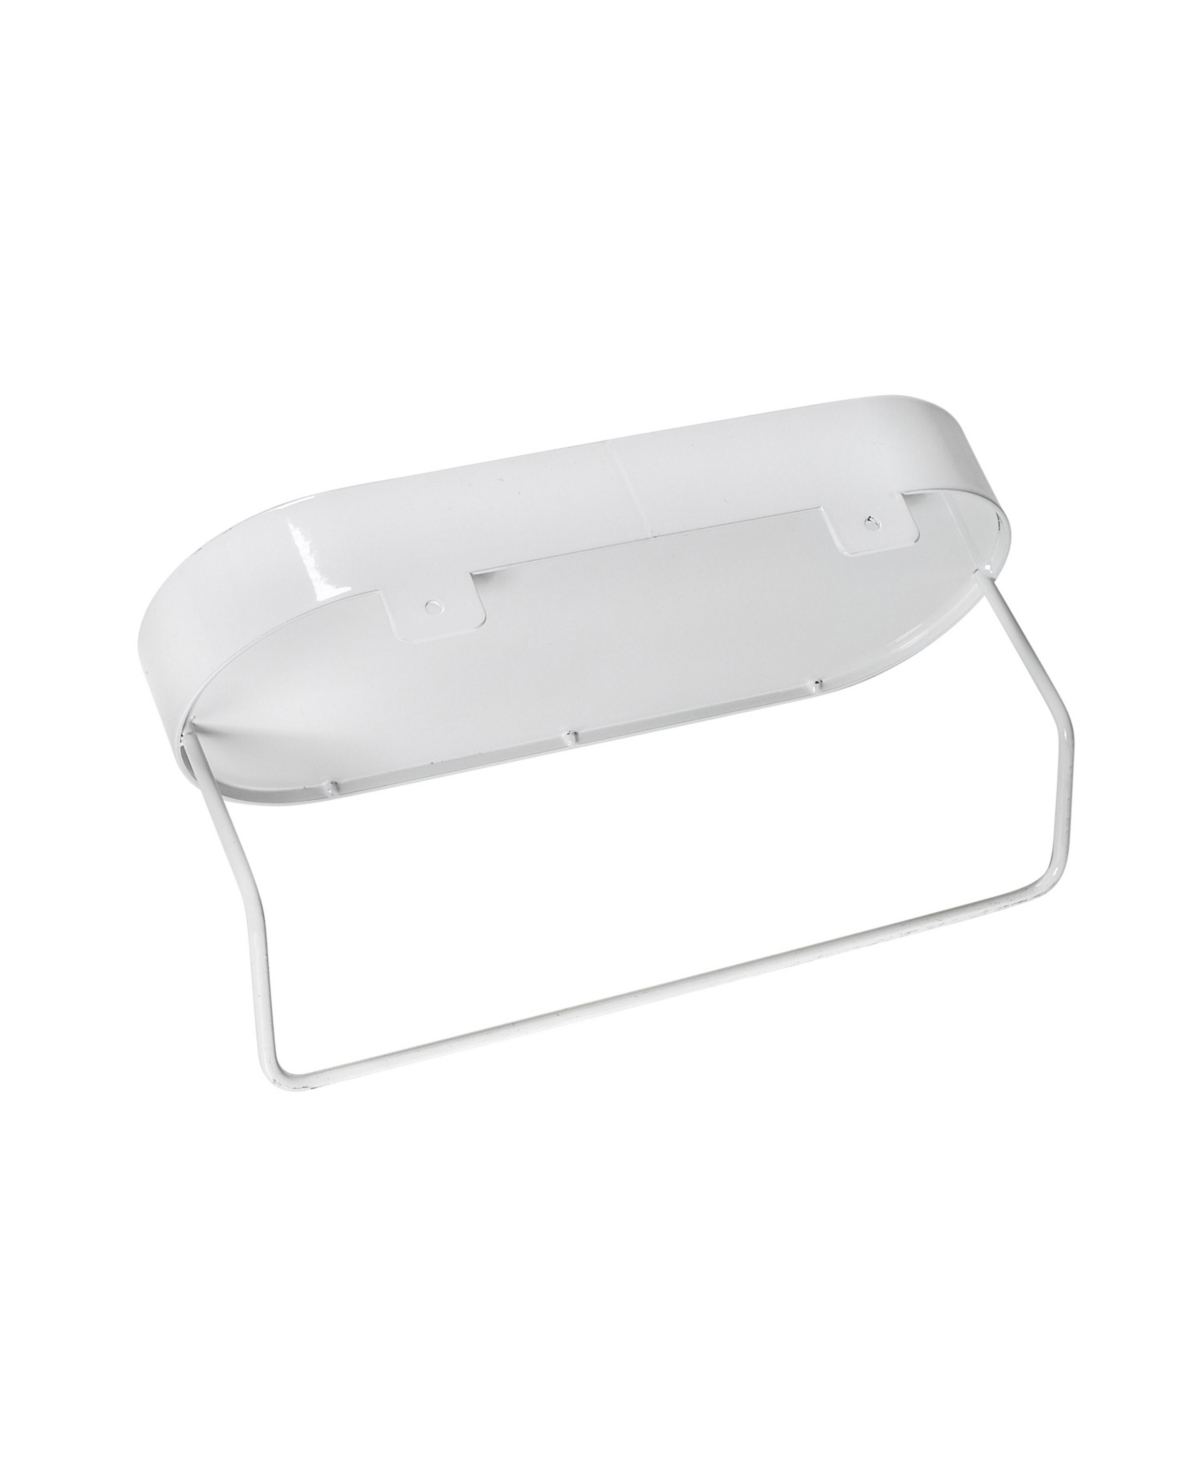 Shop Honey Can Do Towel Bar And Oval Top Tray With Wall Mounted Bathroom Shelf In White